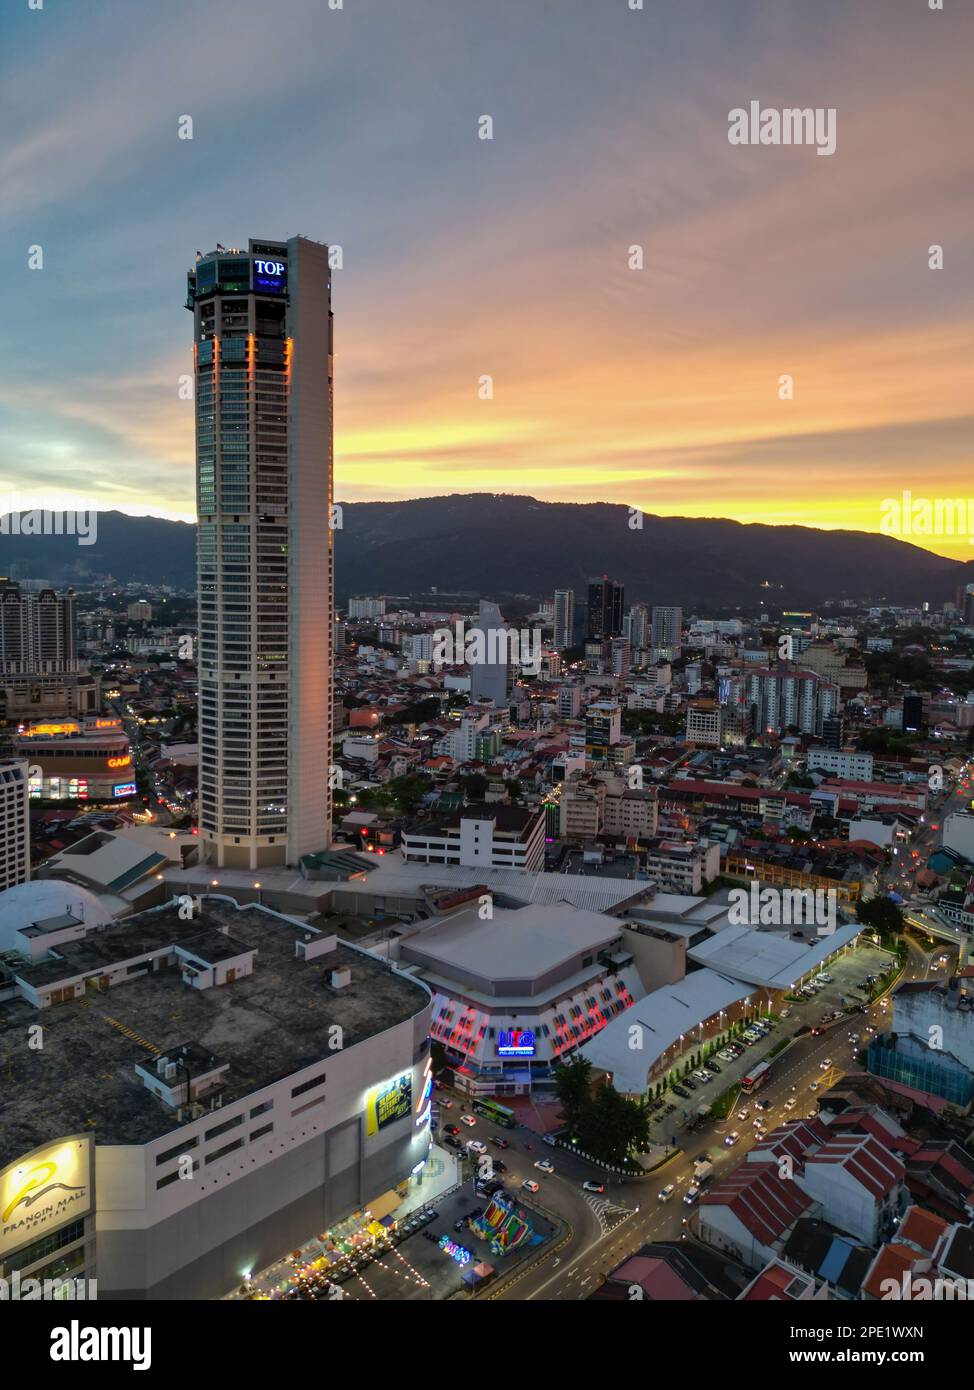 George Town, Penang, Malaysia - Sep 26 2022: Vertical view of Komtar building and Prangin Mall in dramatic sunset hour Stock Photo